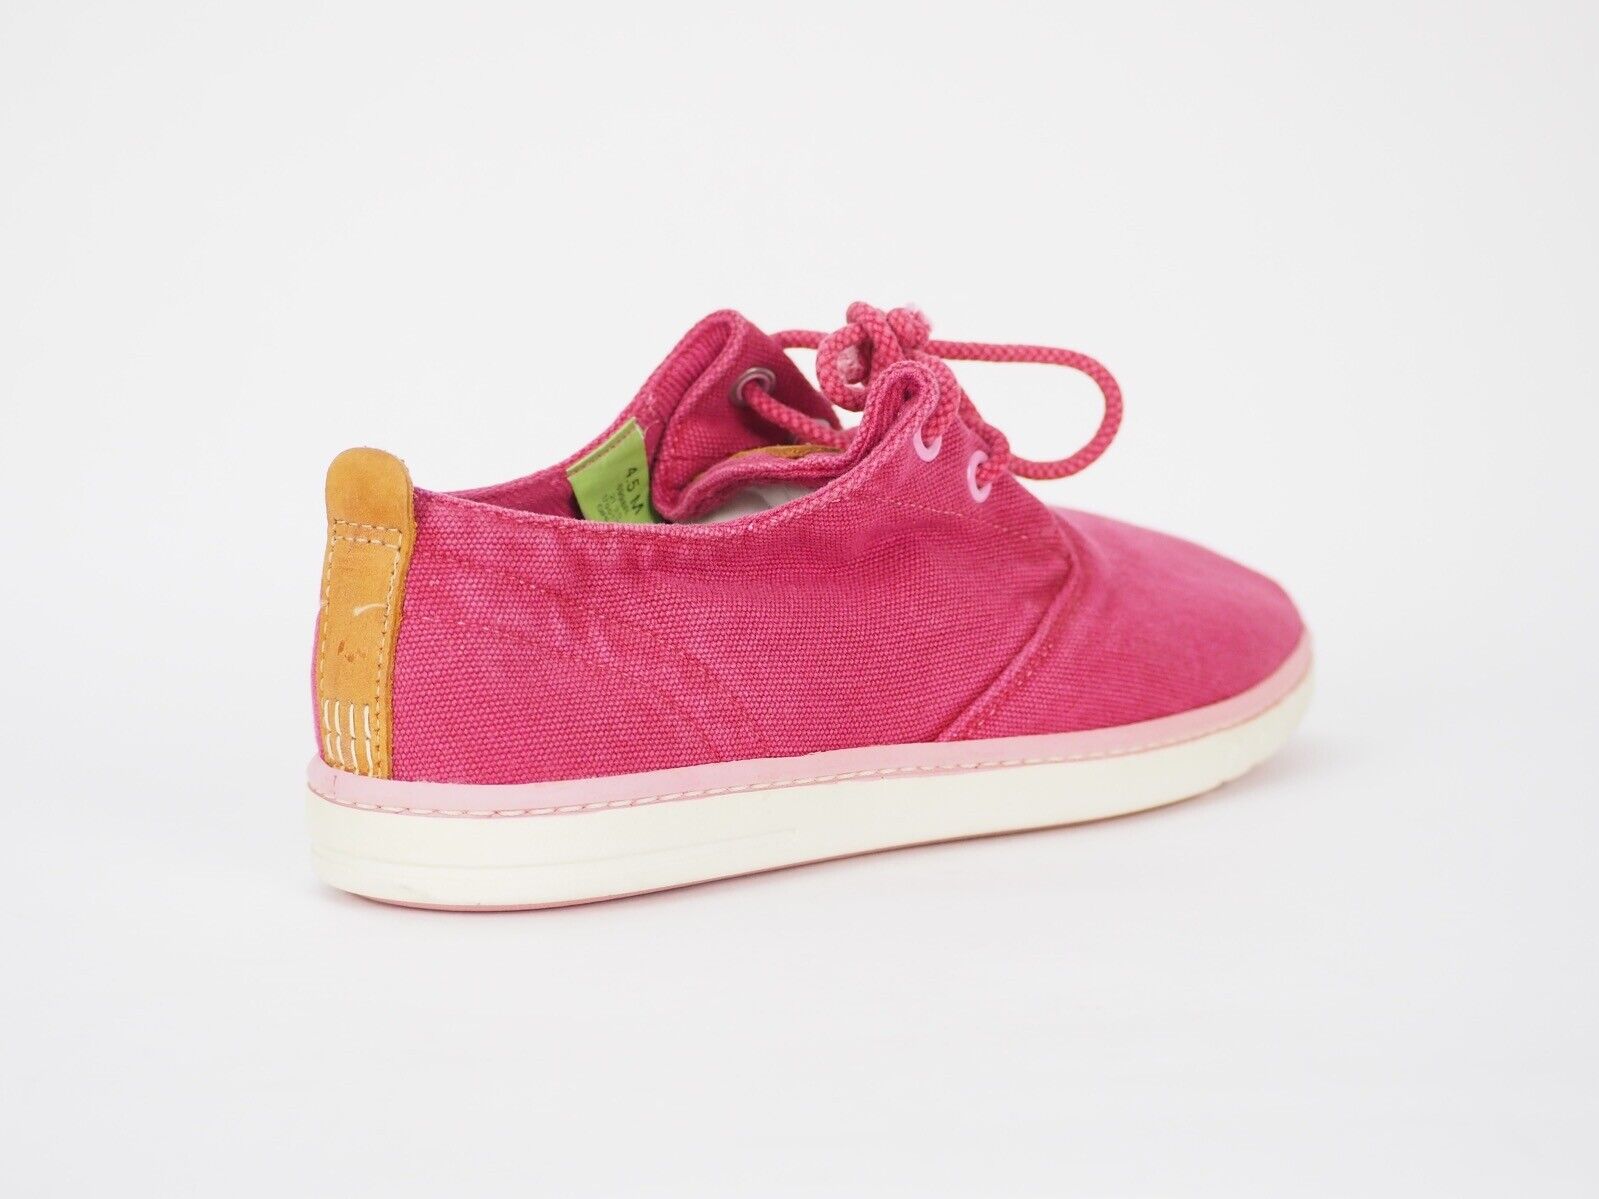 Girls Timberland Hookset 6998R Pink Lace Up Soft Casual Low Trainers Kids Shoes - London Top Style